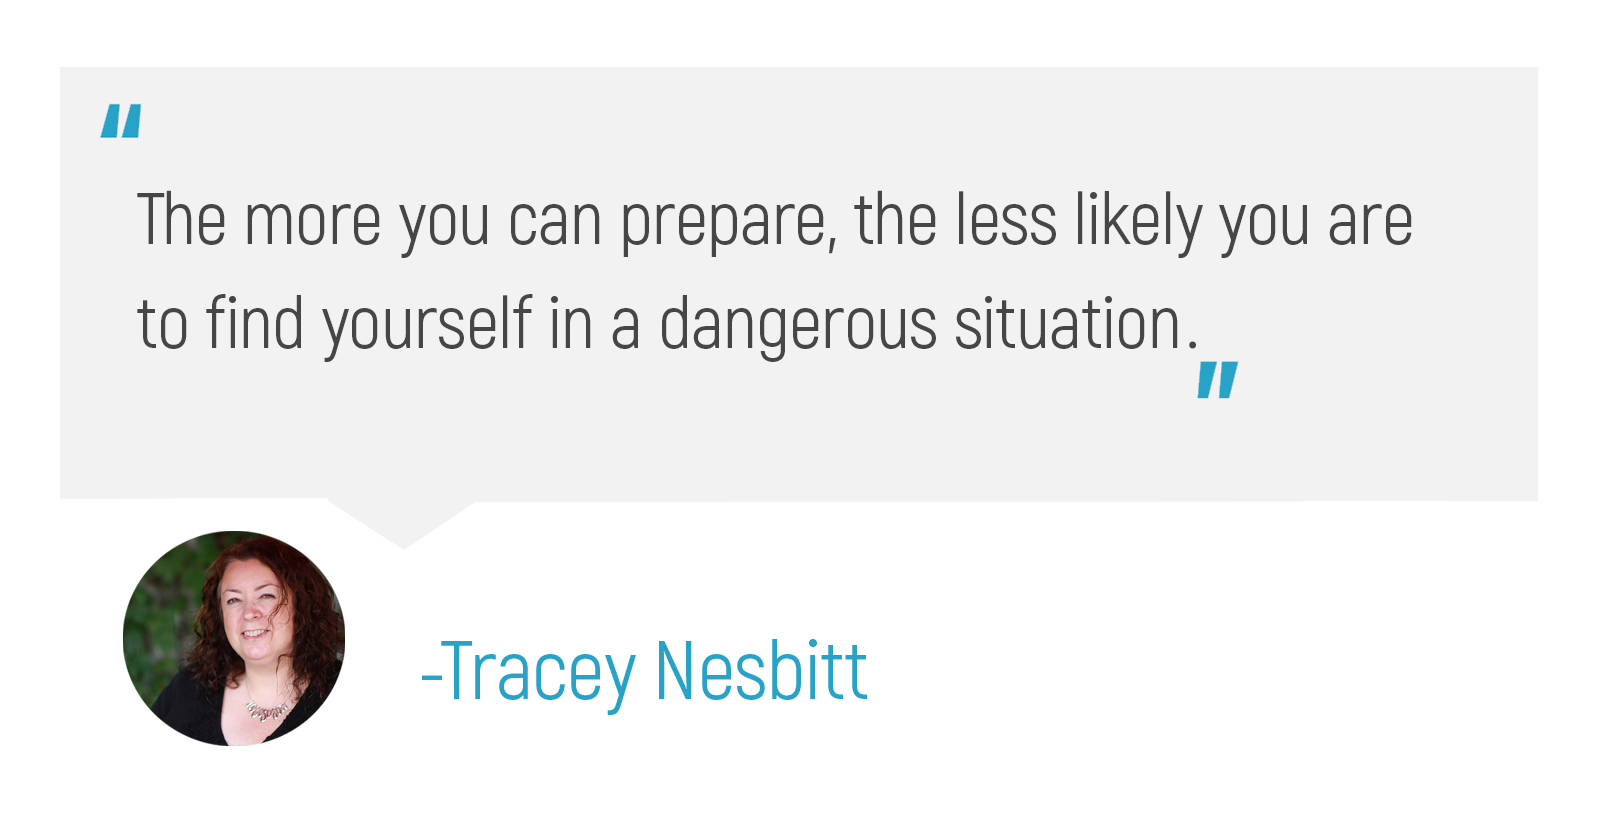 "The more you can prepare, the less likely you are to find yourself in a dangerous situation."